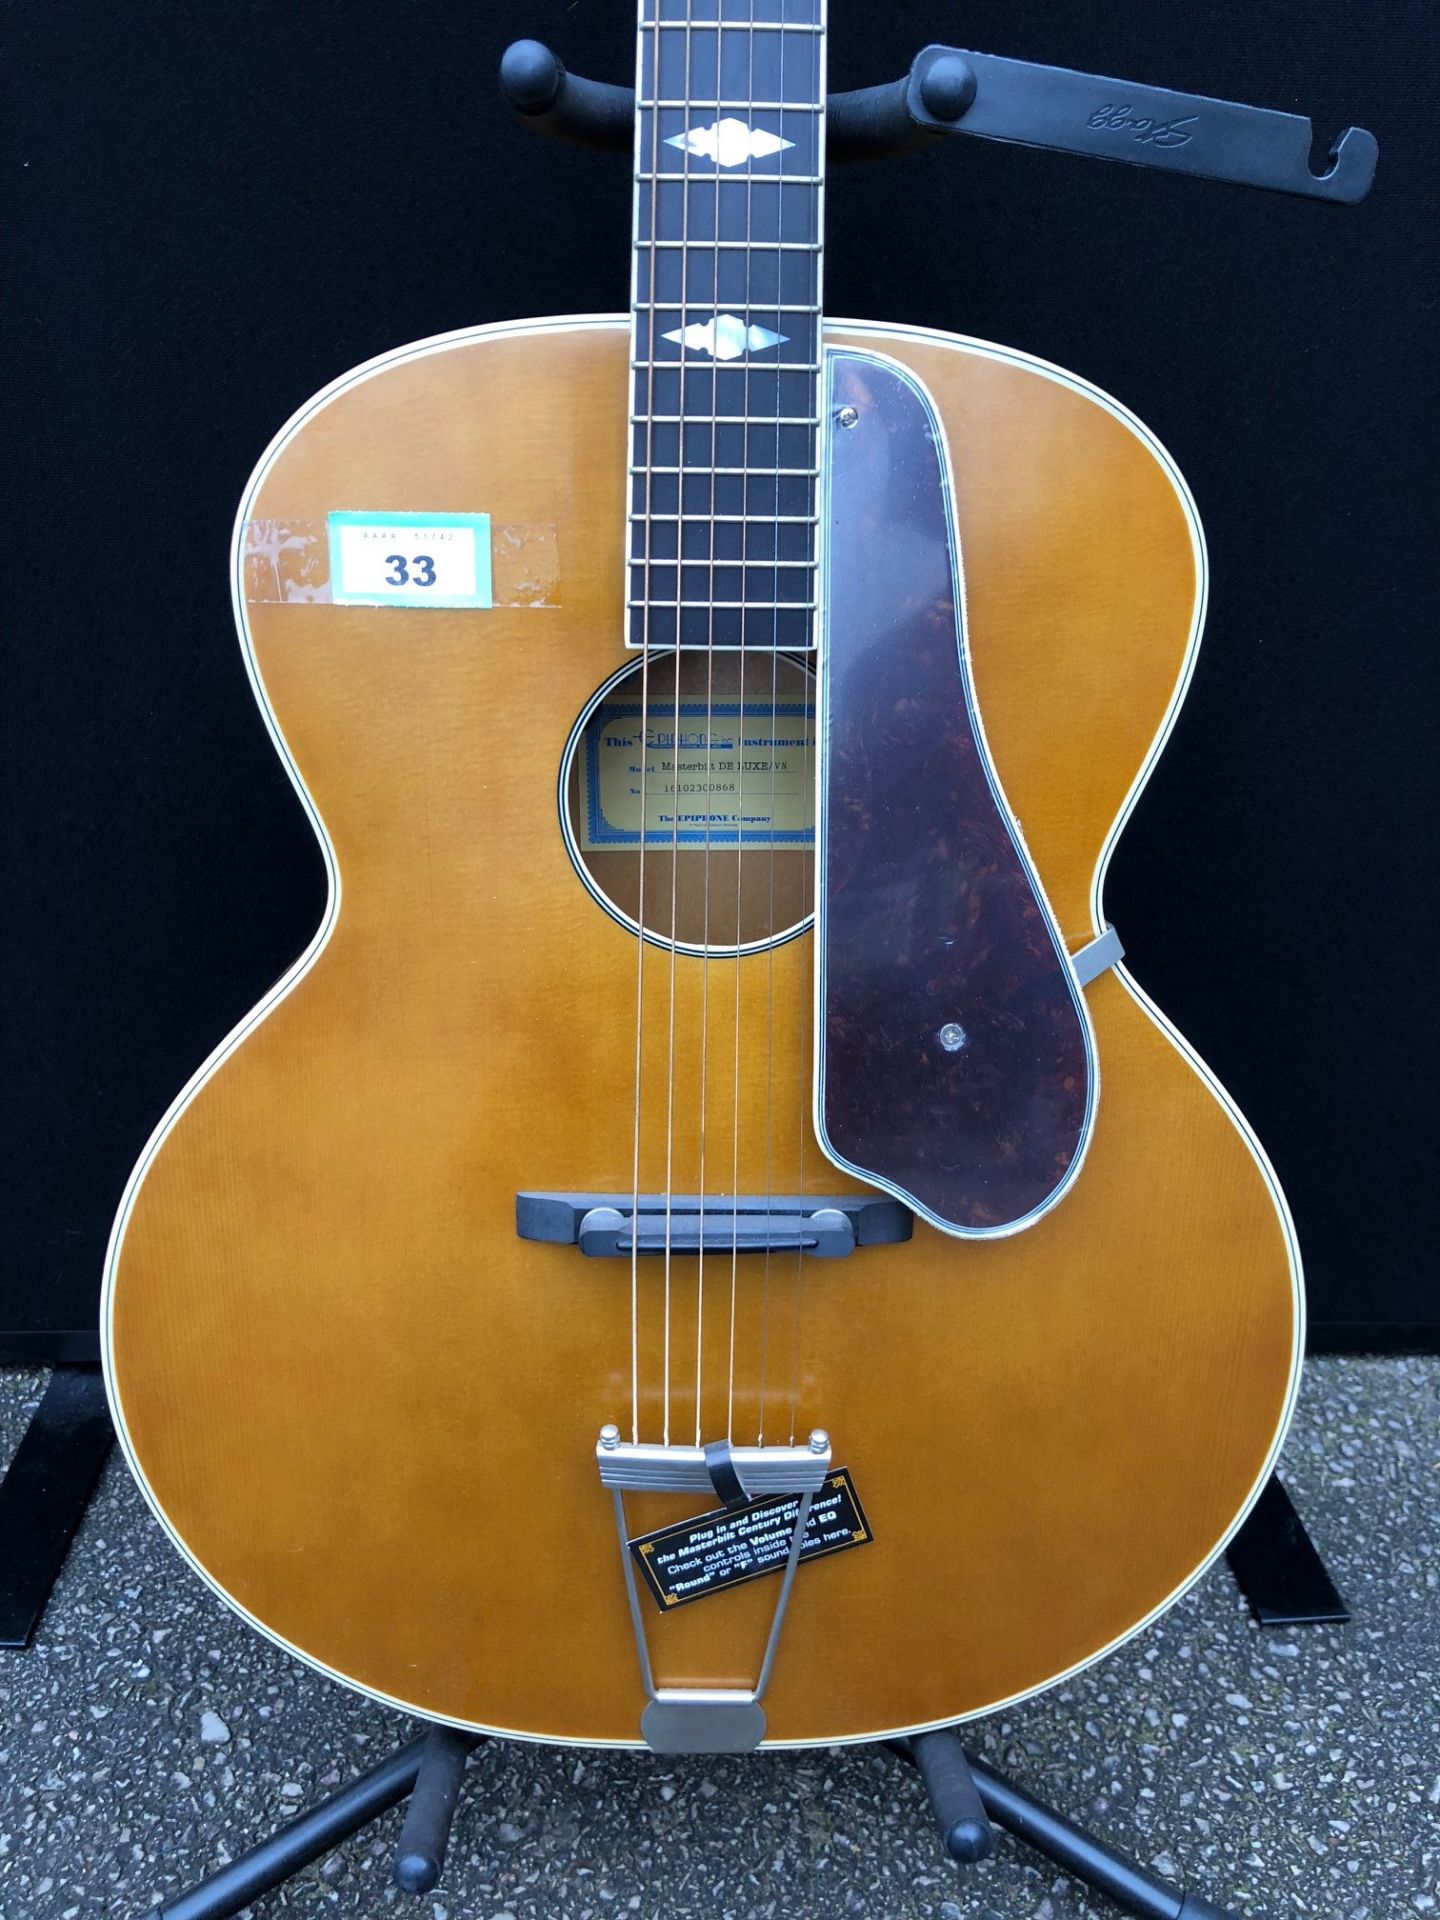 Epiphone Deluxe Round Hole Masterbilt Electro Acoustic Guitar (Brand New Ex Display - RRP £729.00) - Image 3 of 6